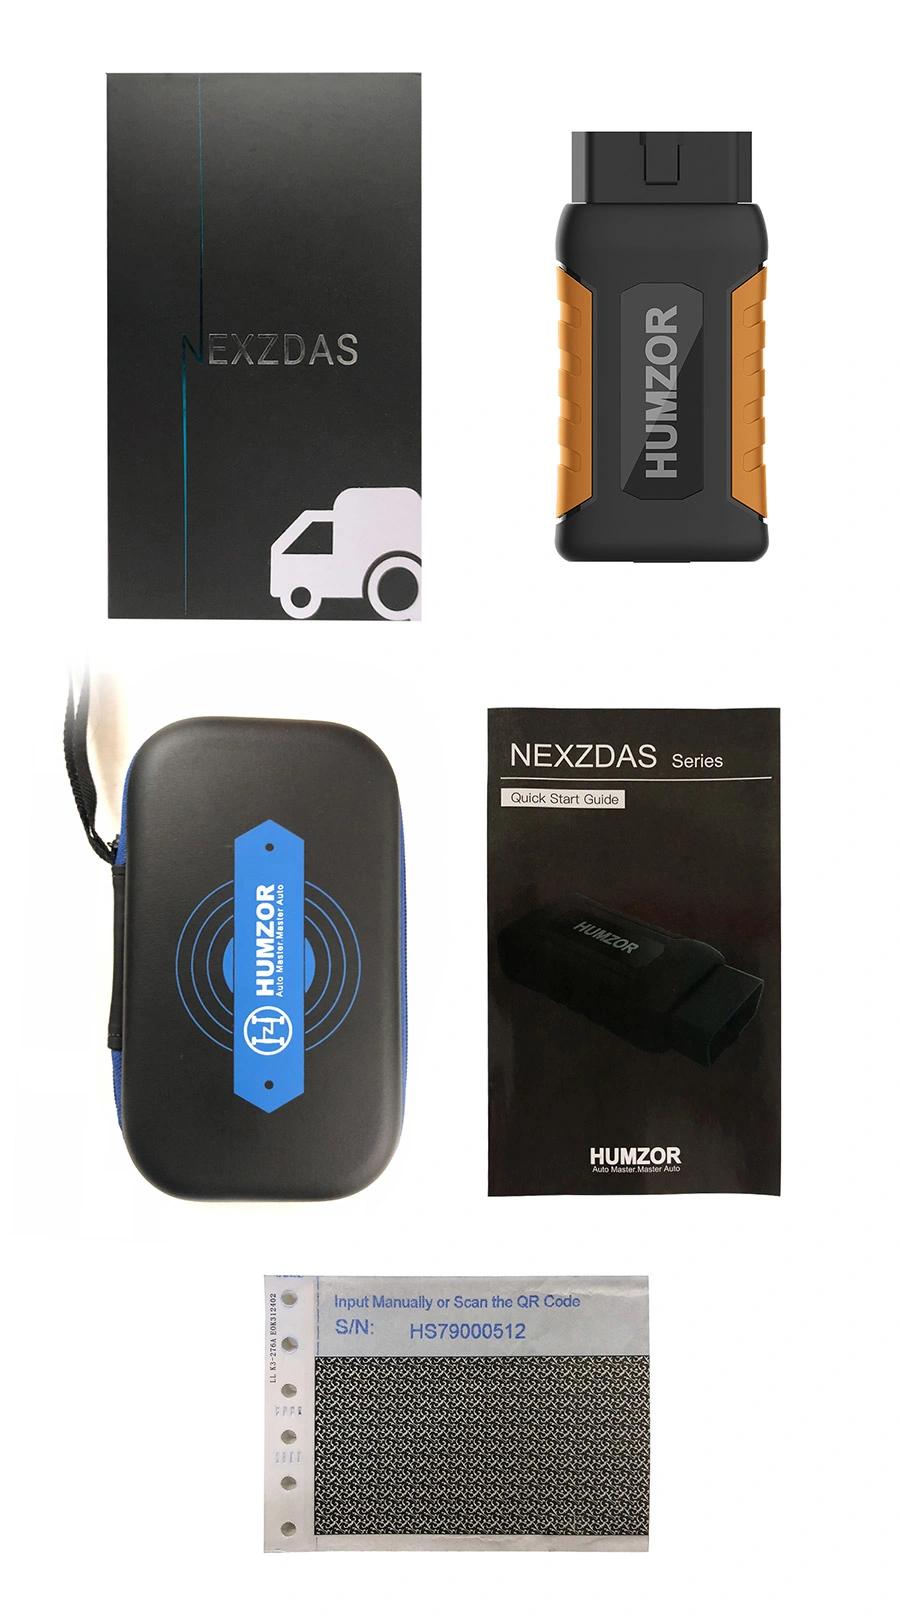 Humzor Nexzdas ND506 Commercial Vehicles Diesel Auto Full System Intelligent Diagnosis Tool